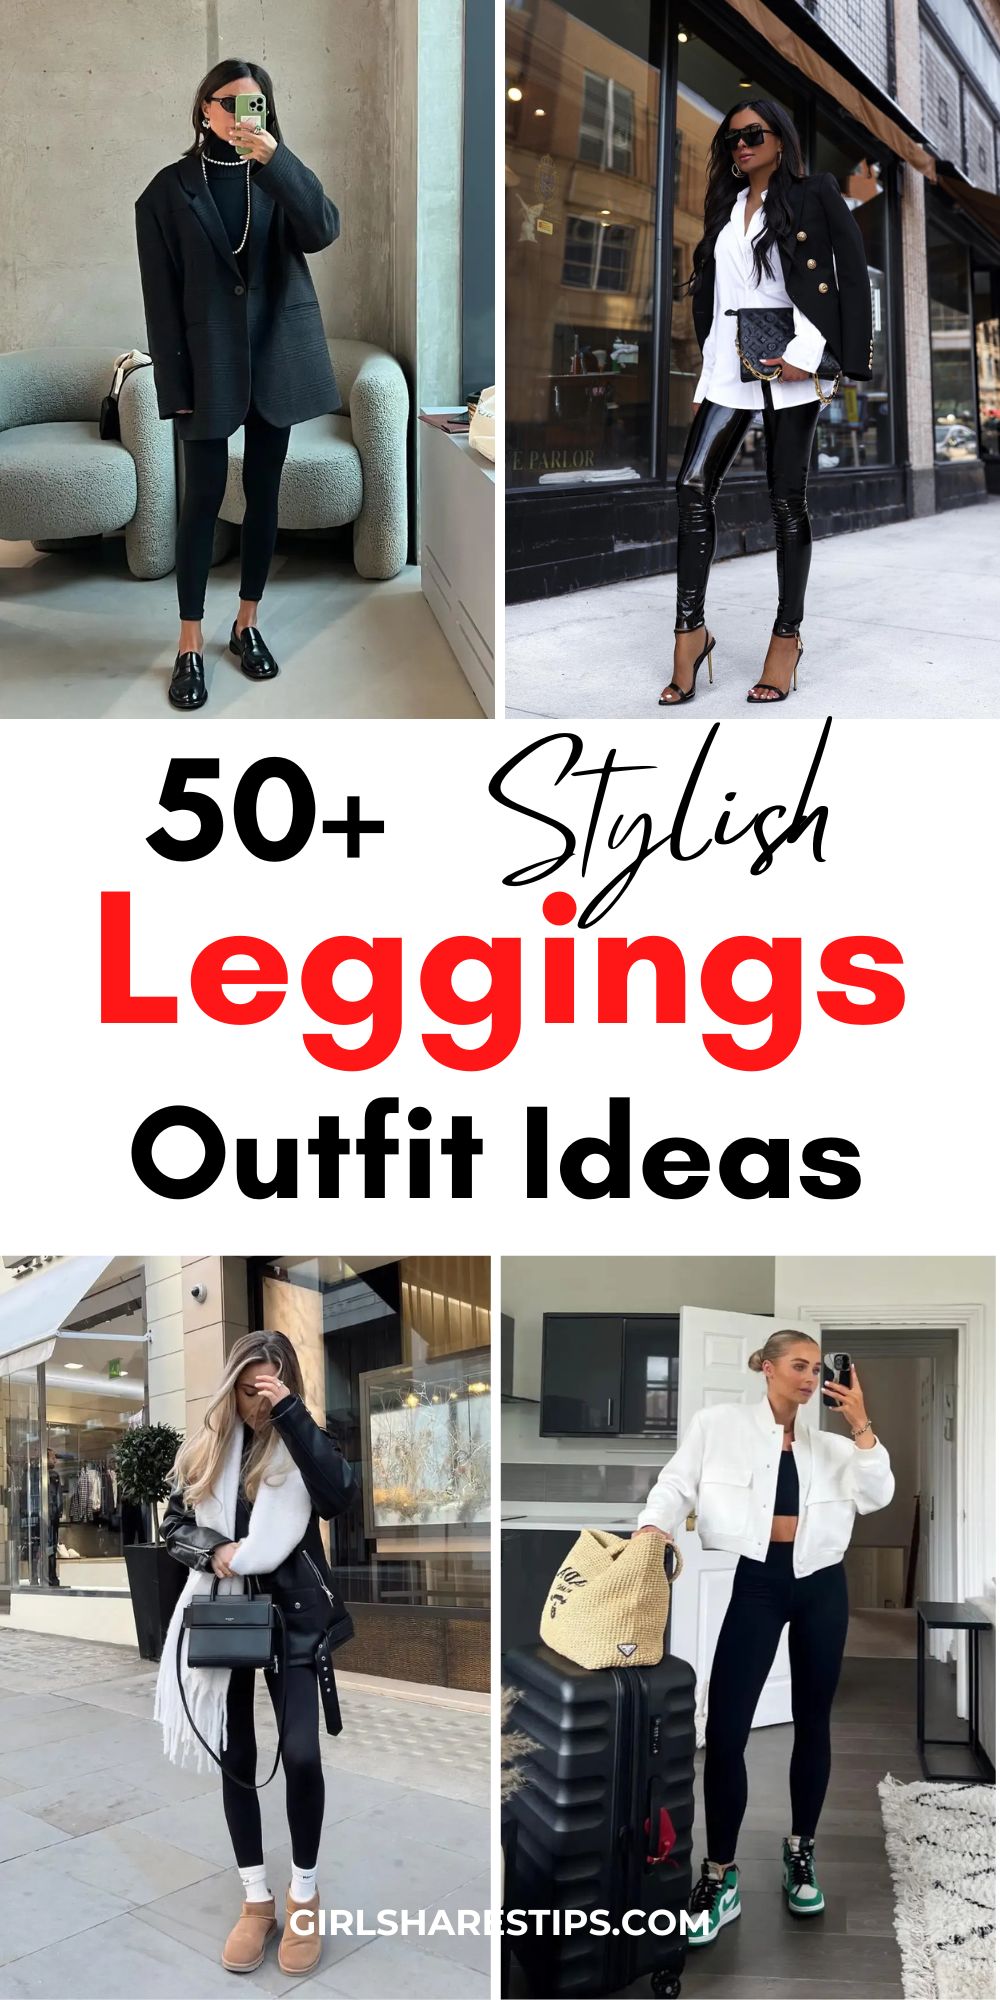 leggings outfit ideas collage